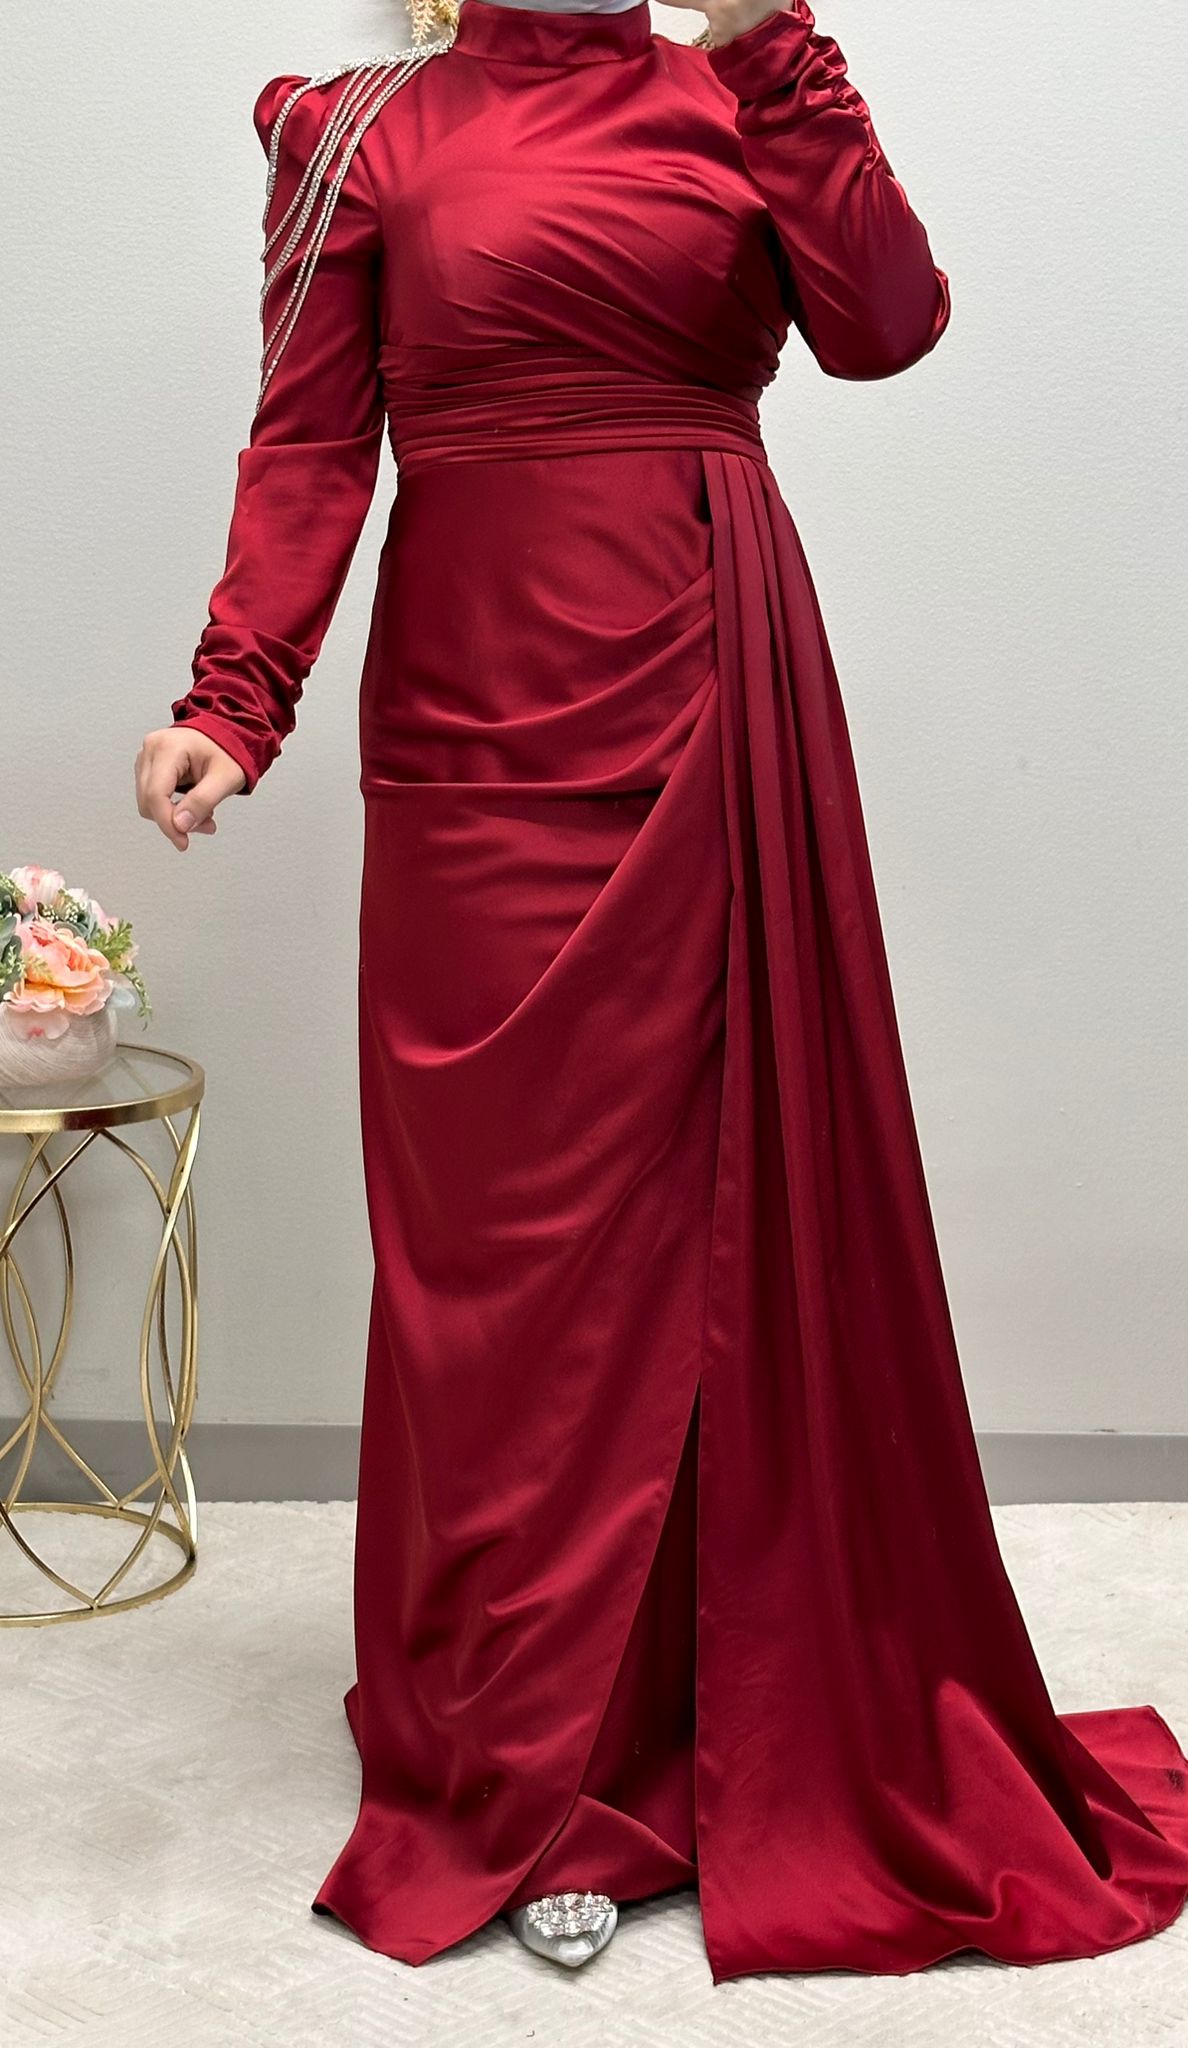 Regal Red Formal Dress: Chains and Overlapping Folds